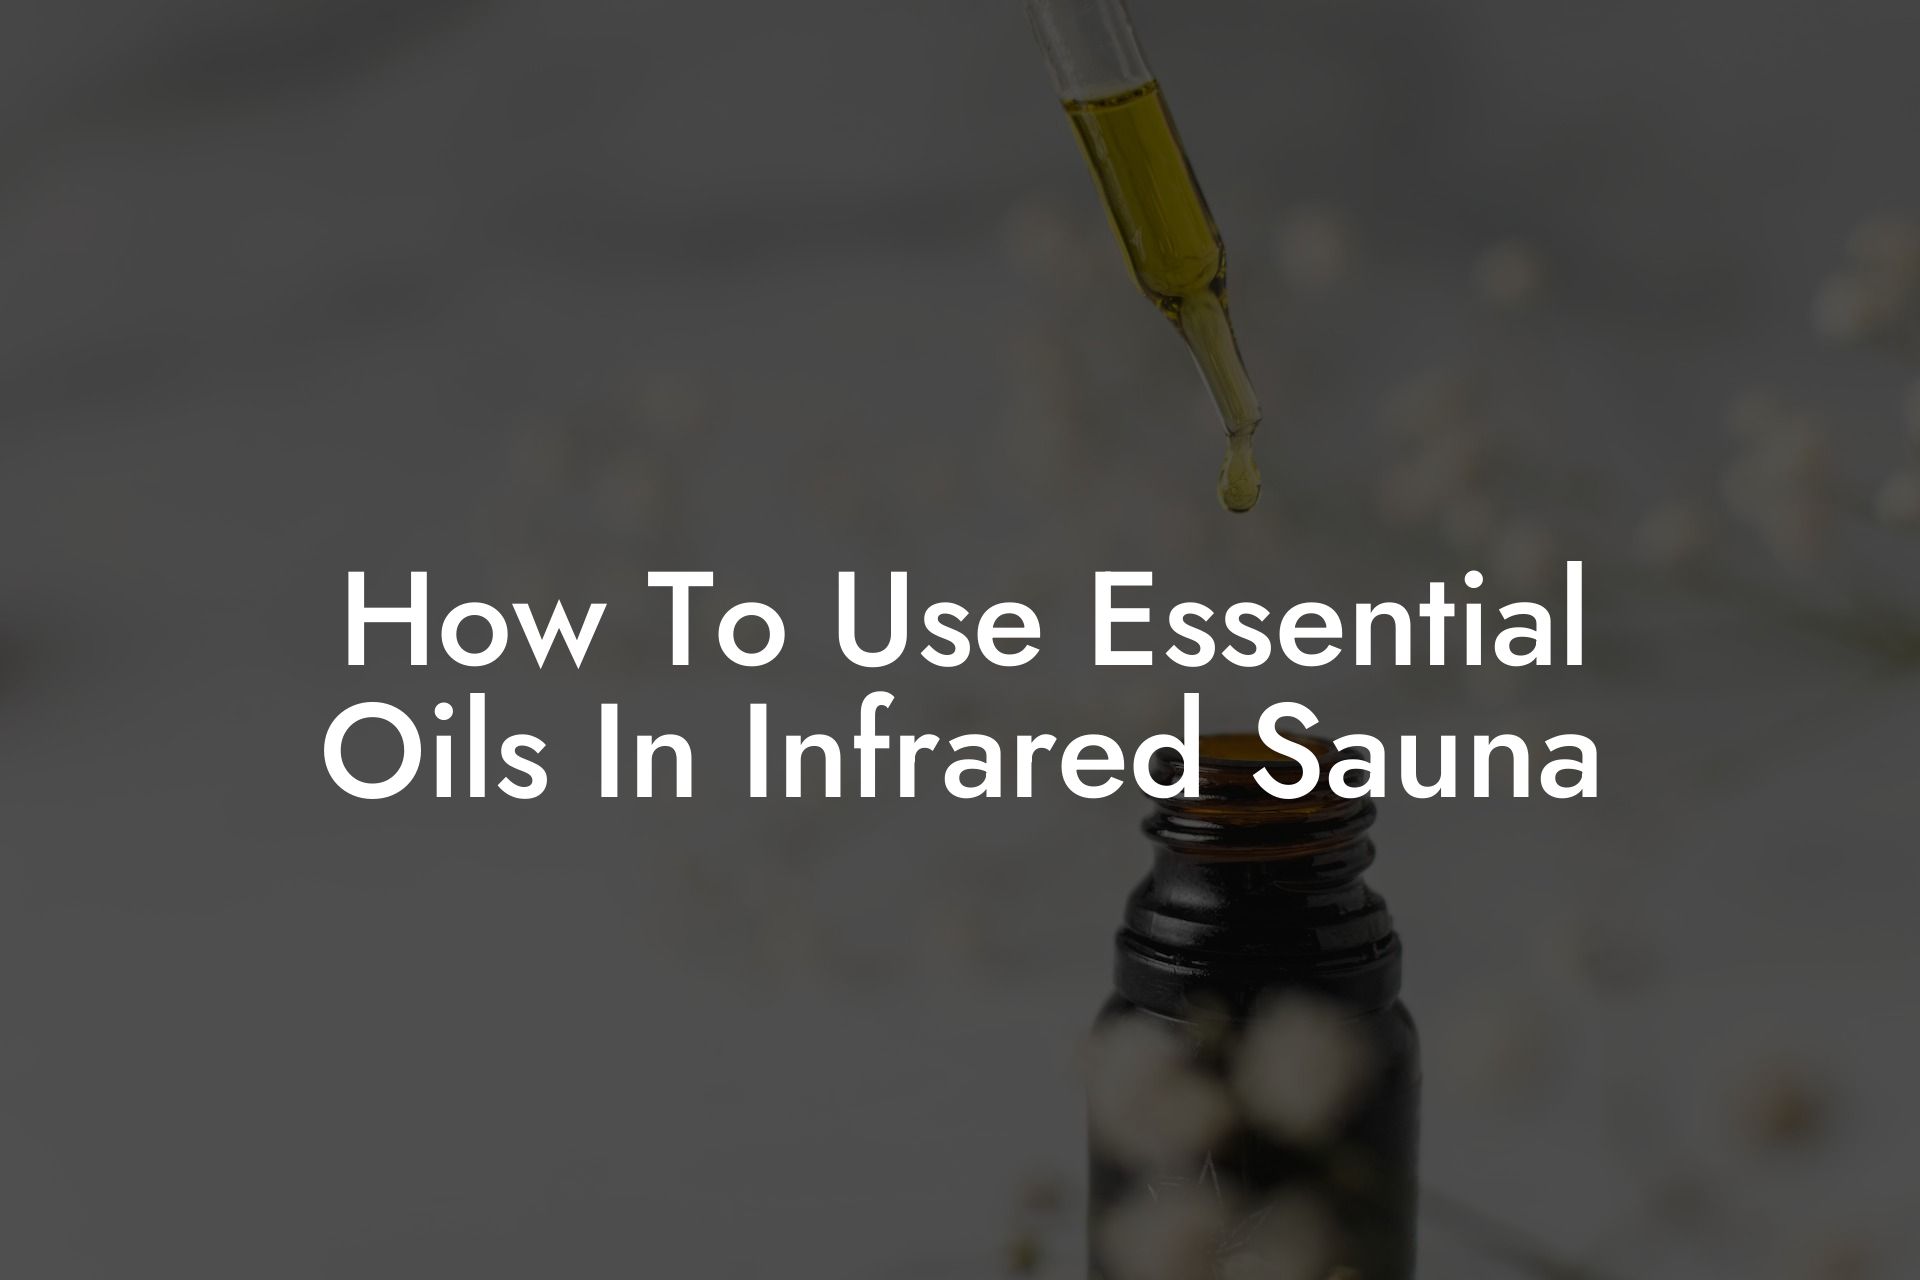 How To Use Essential Oils In Infrared Sauna